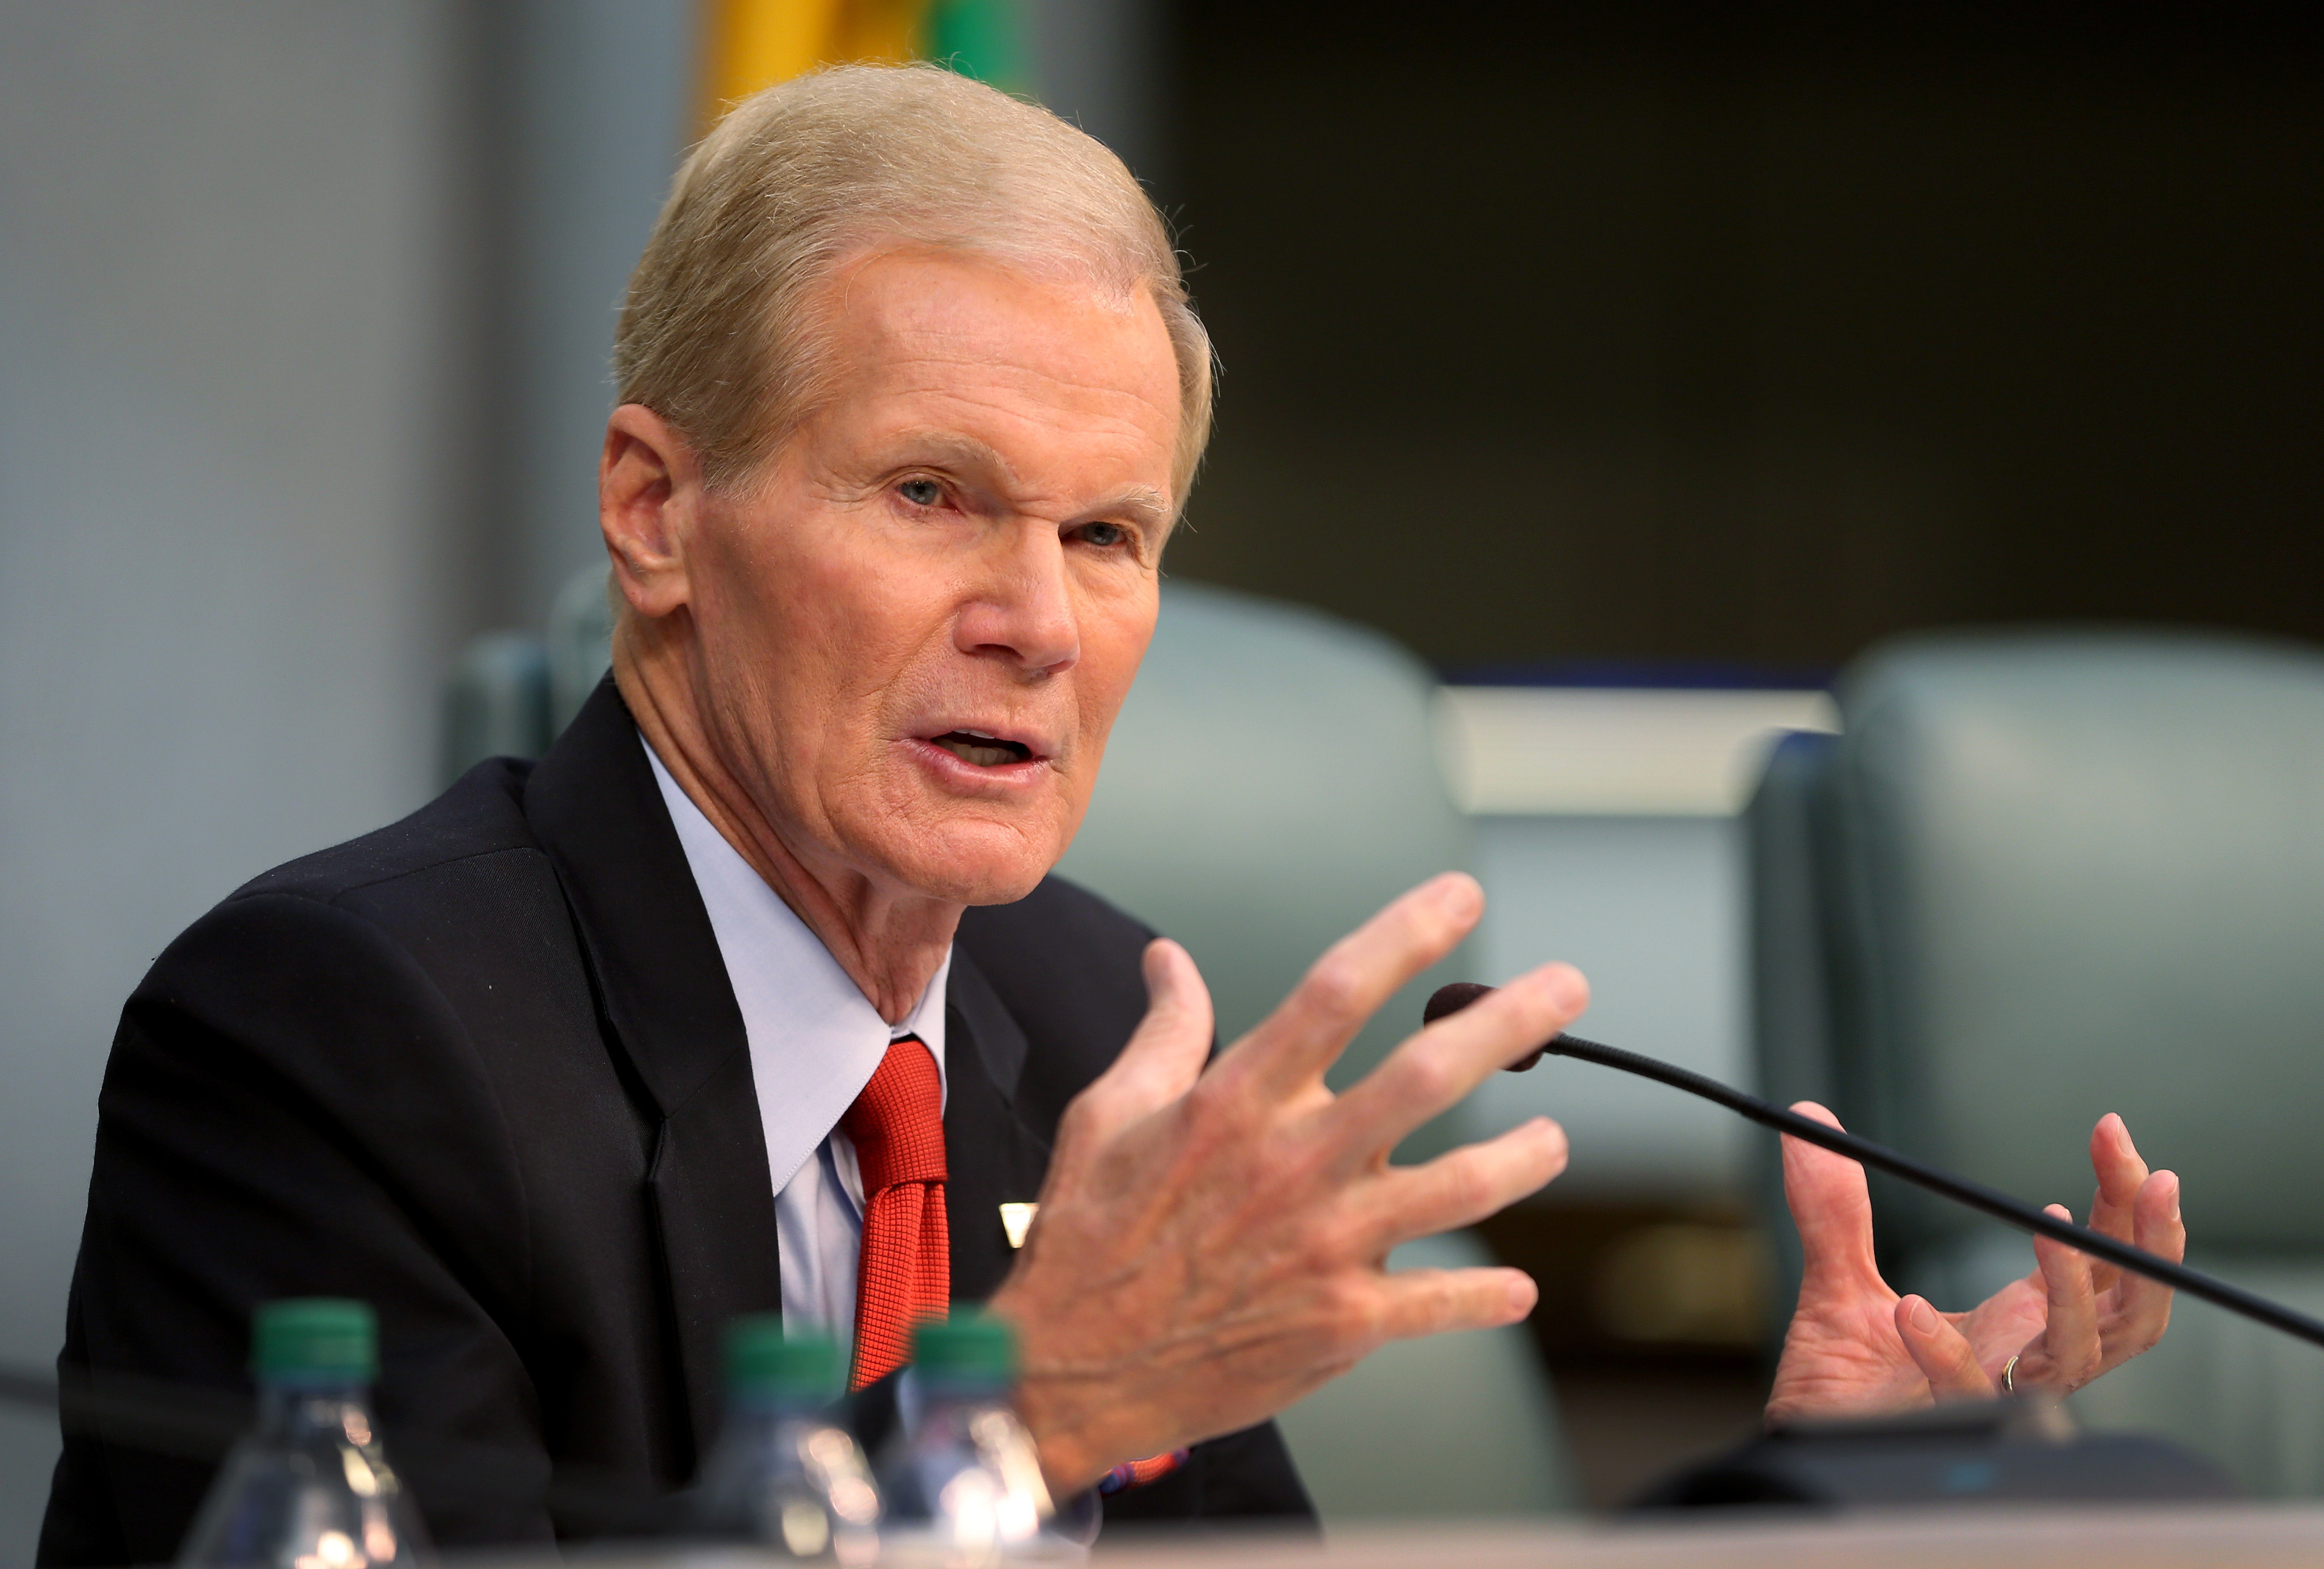 U.S. Sen. Bill Nelson (D-FL) speaks as he chairs a hearing entitled, "Leading the Way: Adapting to South Florida's Changing Coastline." by the U.S. Senate Committee on Commerce, Science, and Transportation's Subcommittee on Science and Space at Miami Beach's City Hall on April 22, 2014 in Miami Beach, Florida. (Joe Raedle—Getty Images)